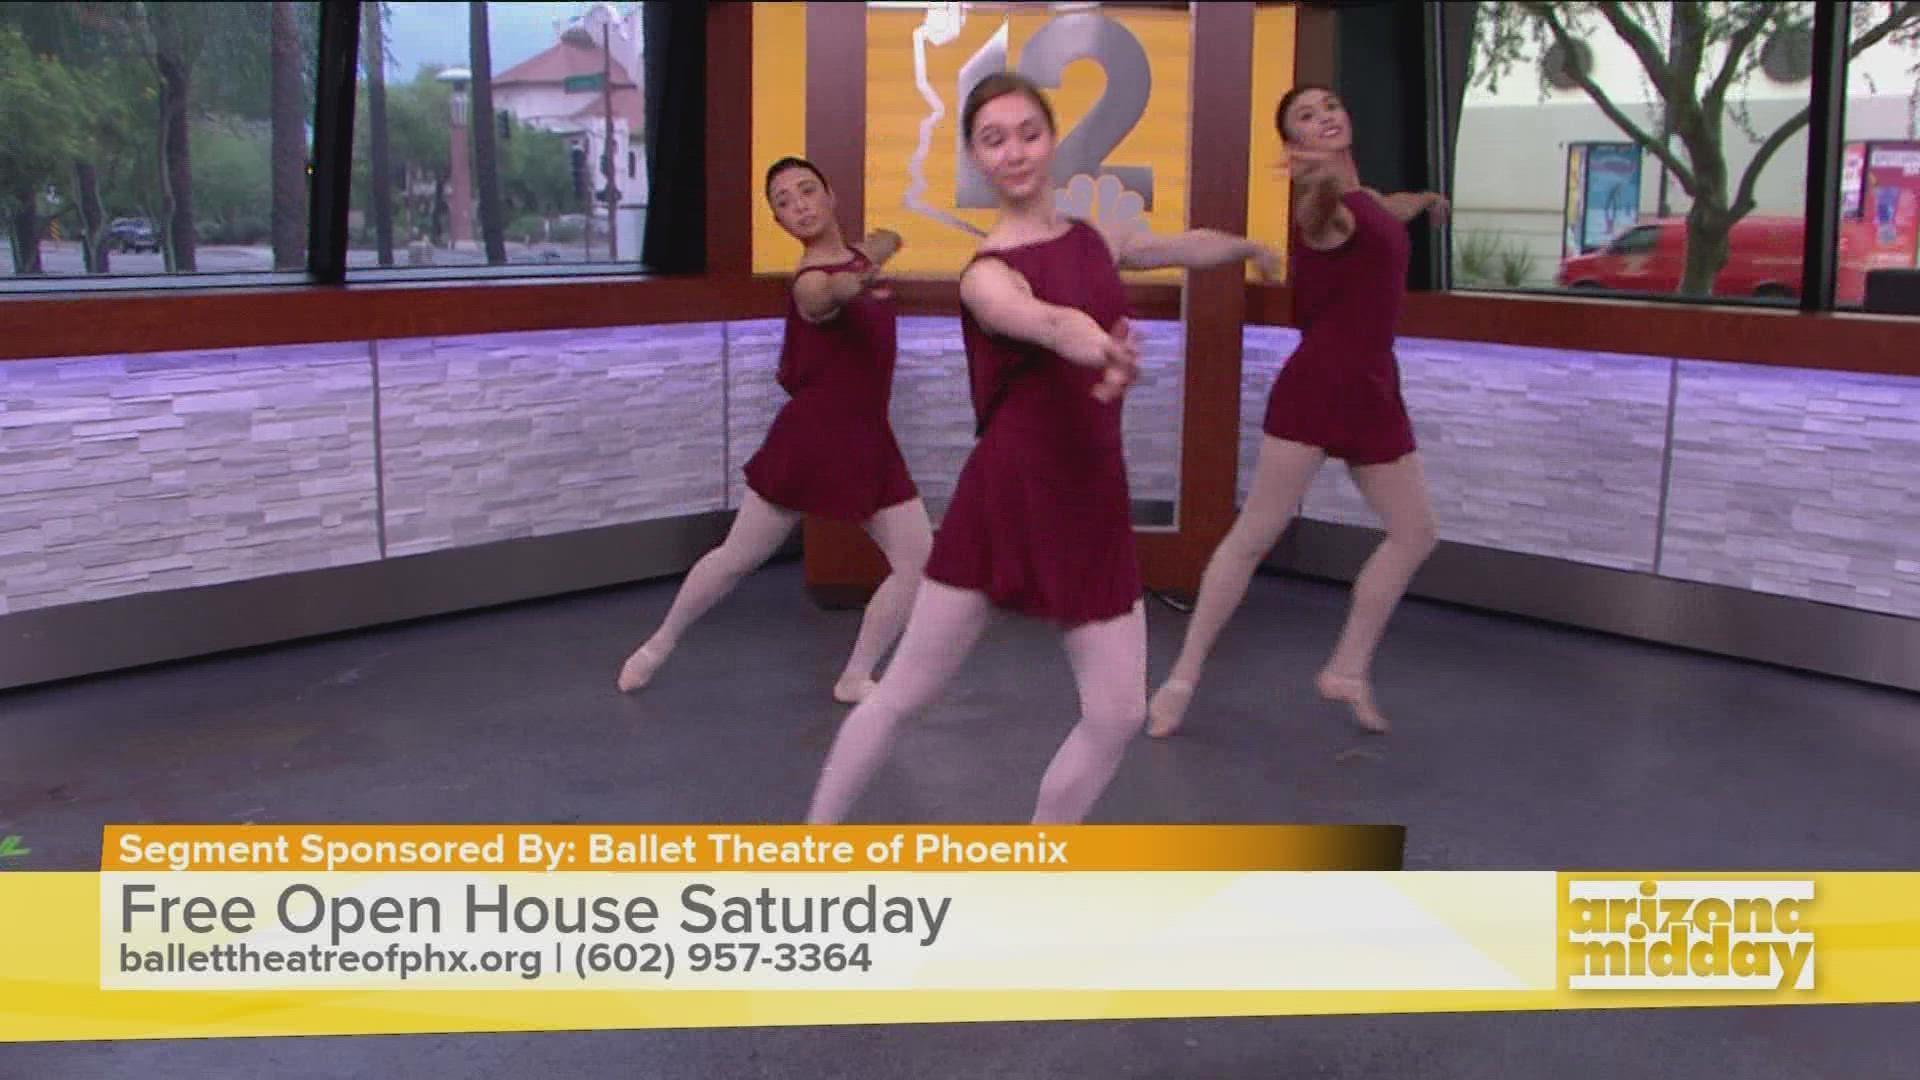 Ballet Theatre of Phoenix is hosting an open house Saturday and you're welcome to take a free class! Jennifer Cafarella-Betts has the details.